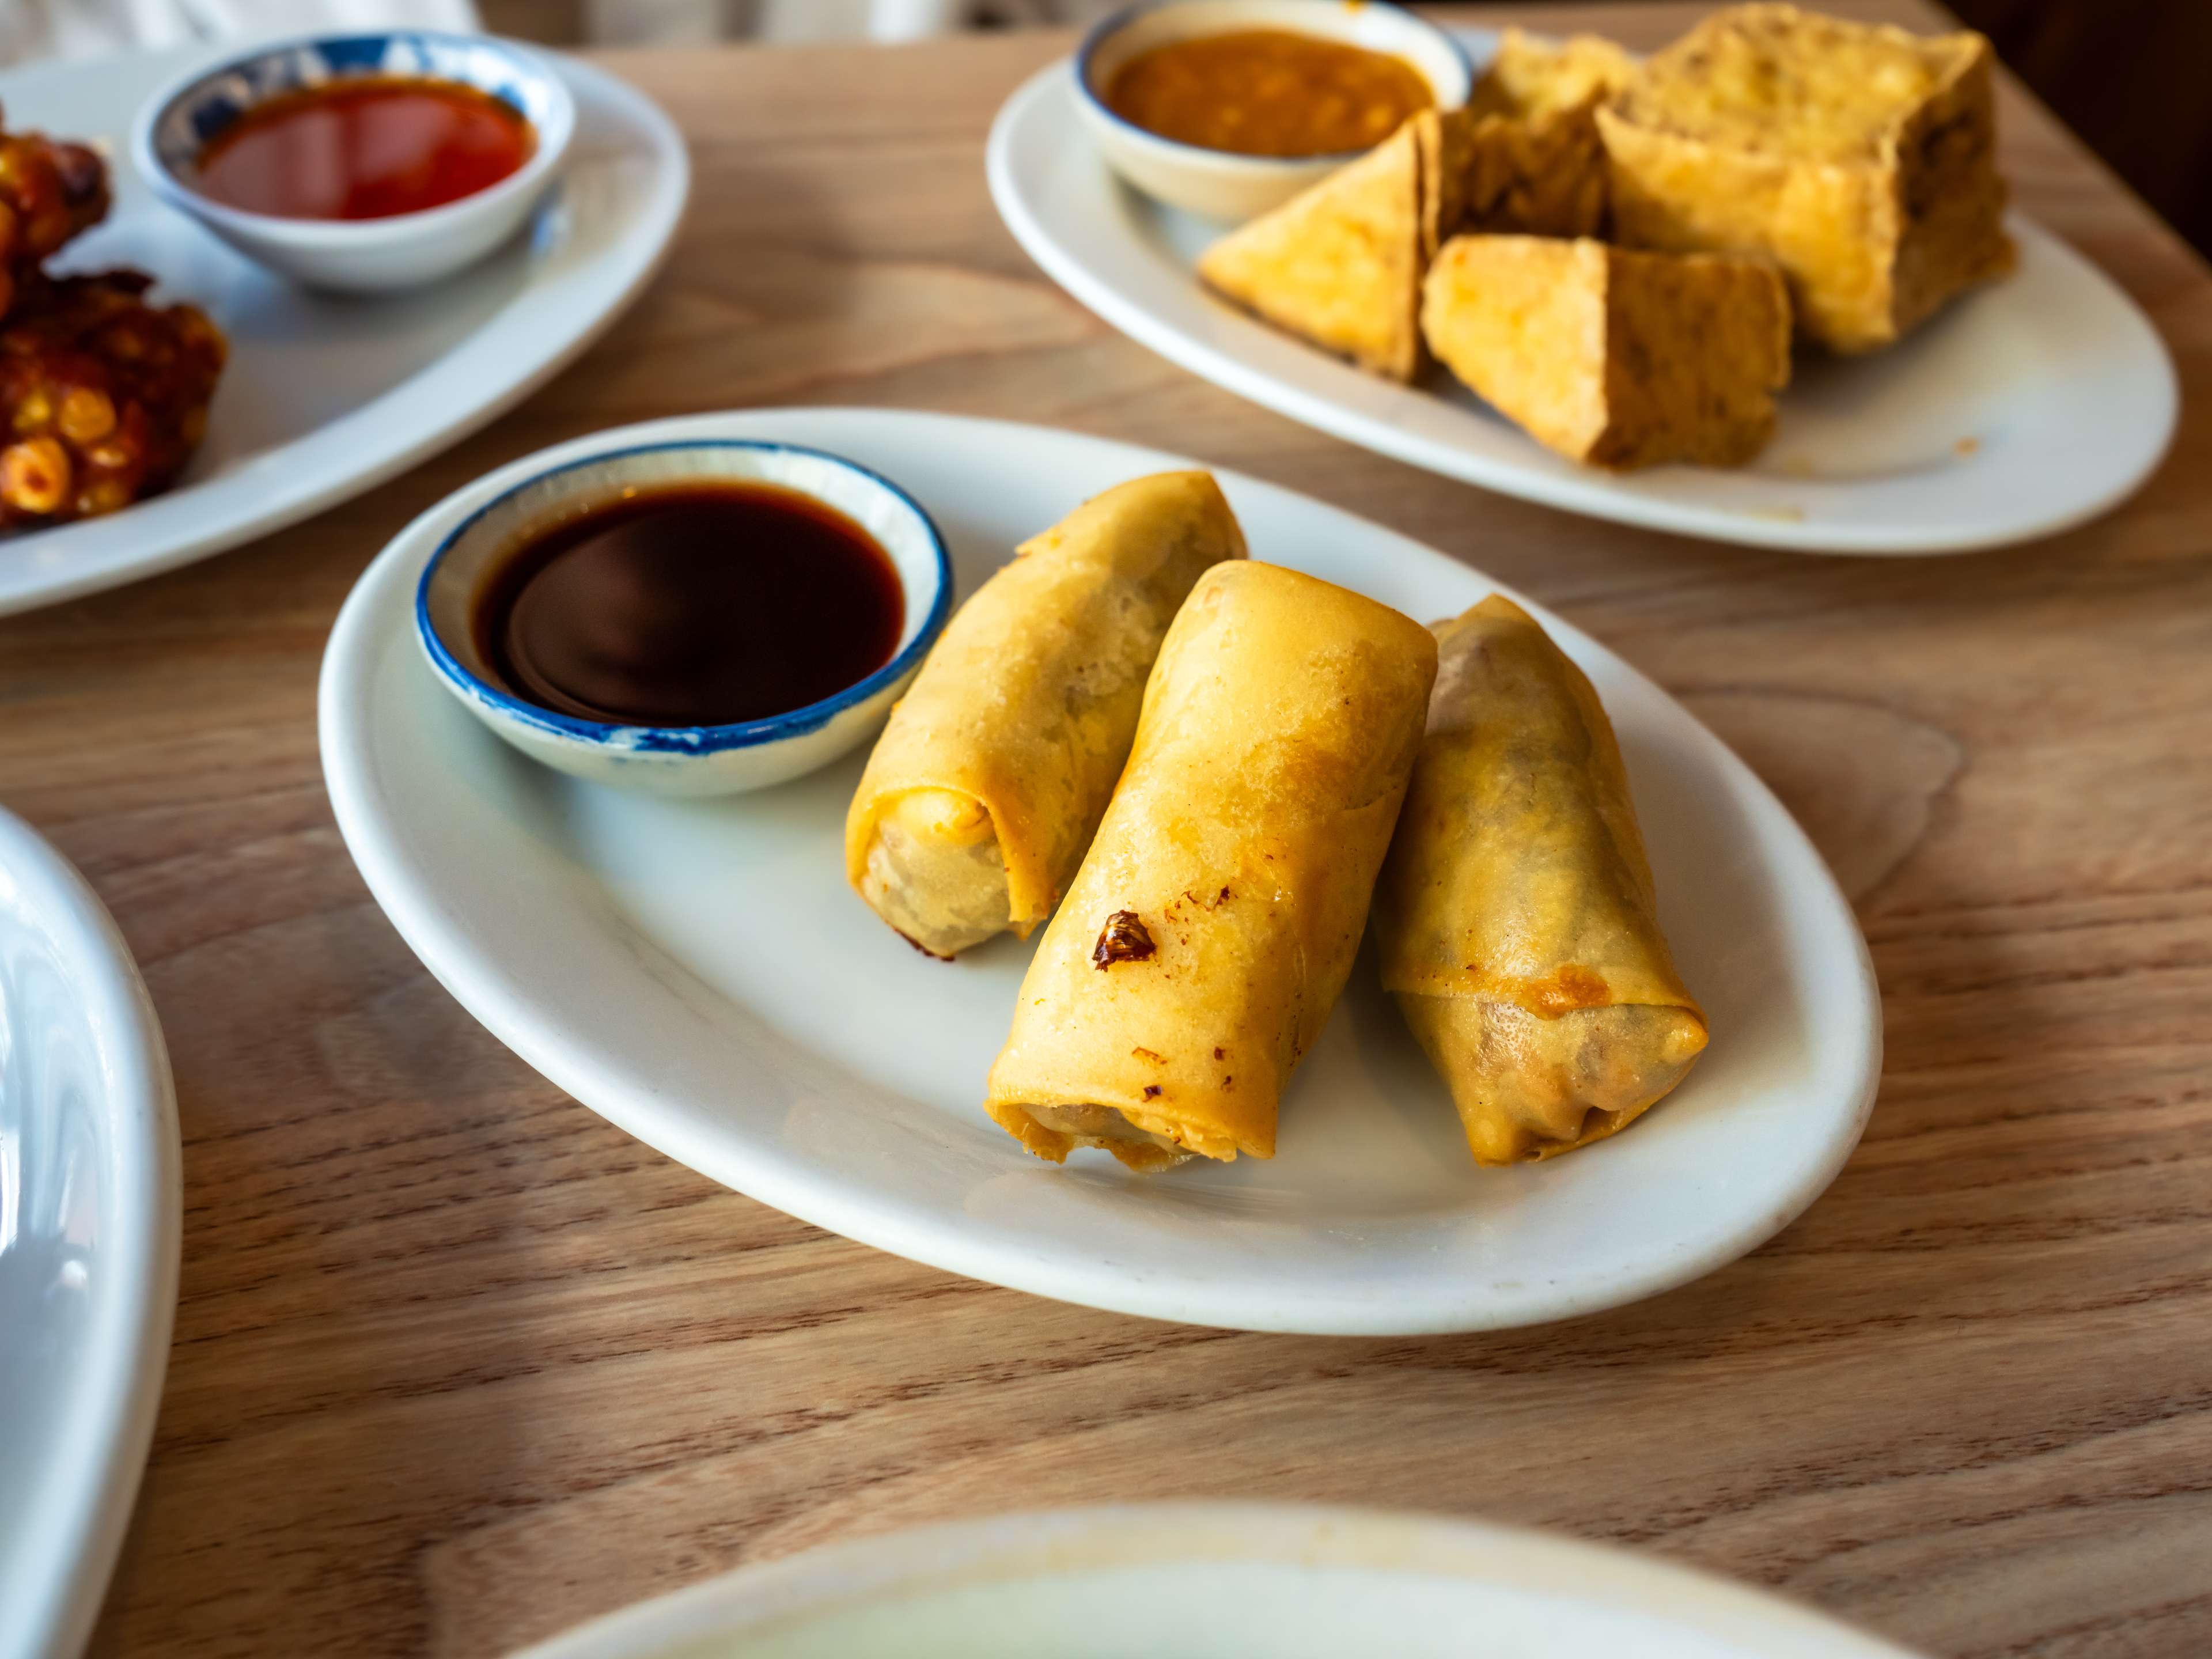 The duck spring rolls from Paolina Thai.